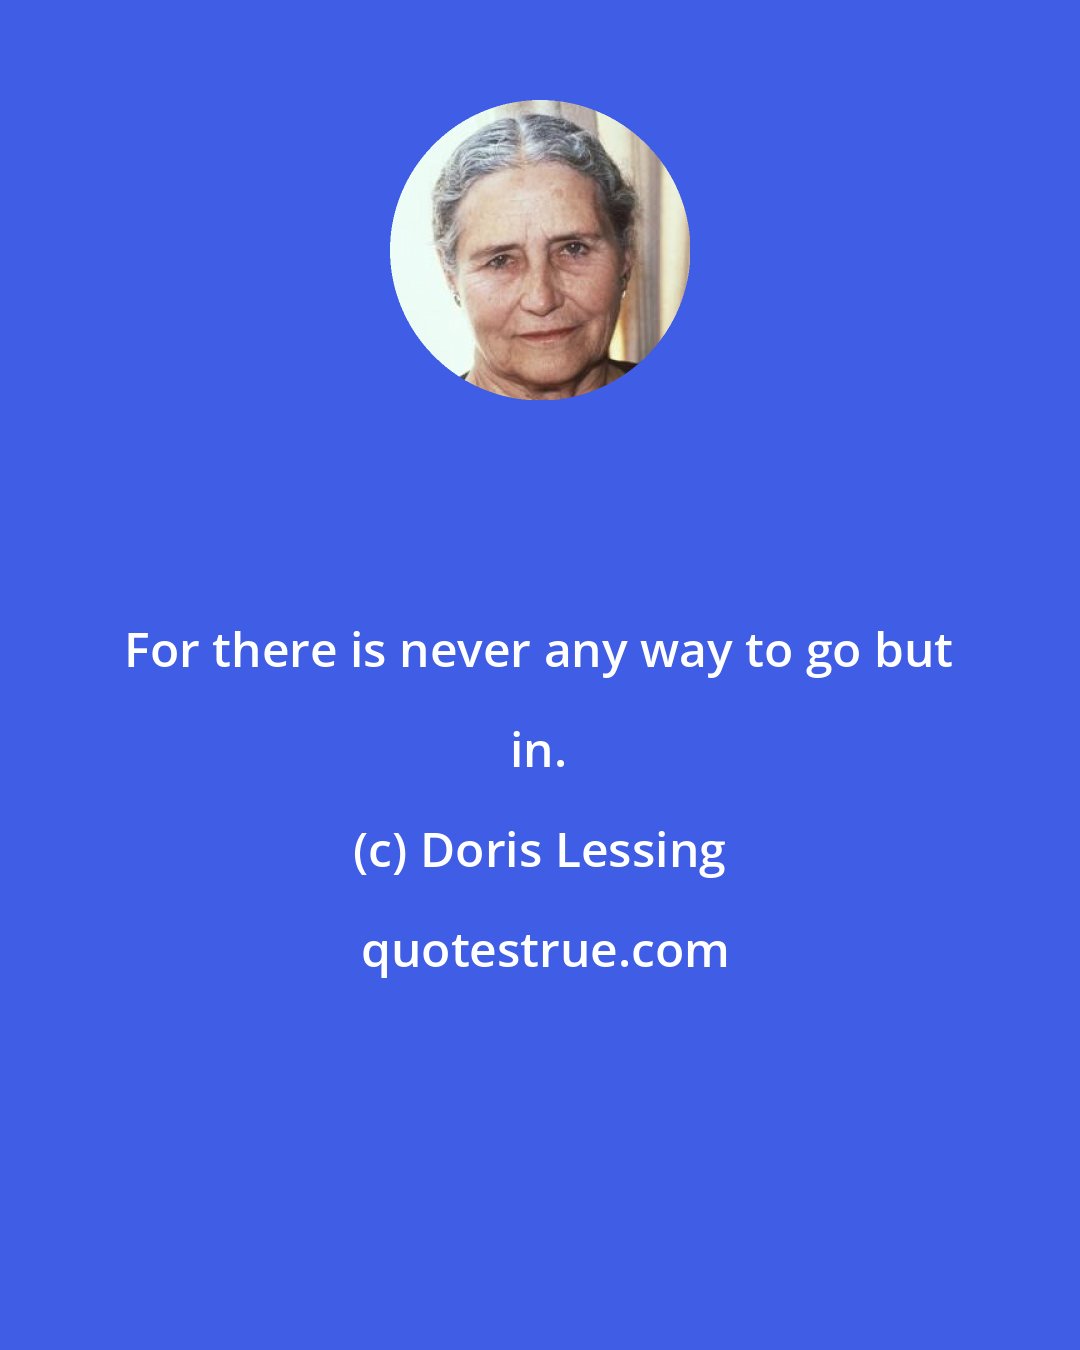 Doris Lessing: For there is never any way to go but in.